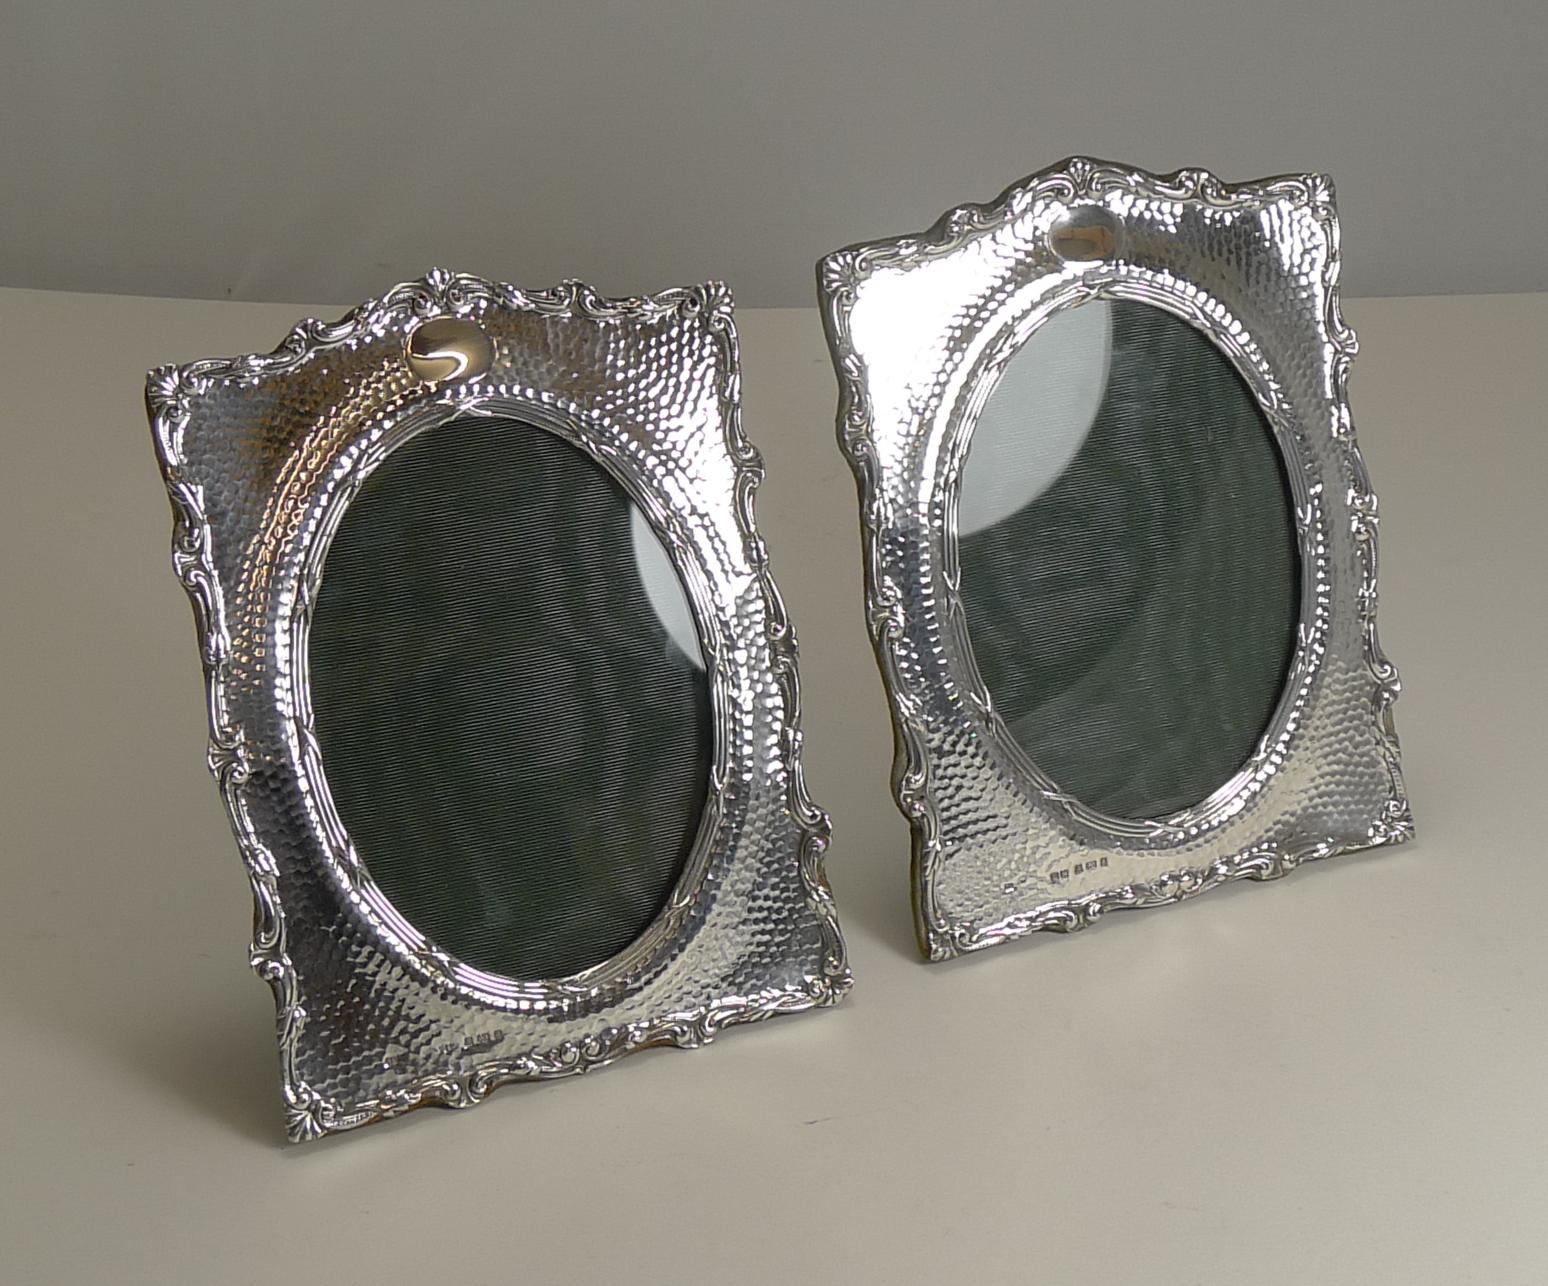 A fabulous pair of English Edwardian photograph frames by the well renowned silversmith, Henry Matthews.

The sterling silver has a planished background, the elegant shape of the frame with a pretty raised border; the oval aperture outlined by a